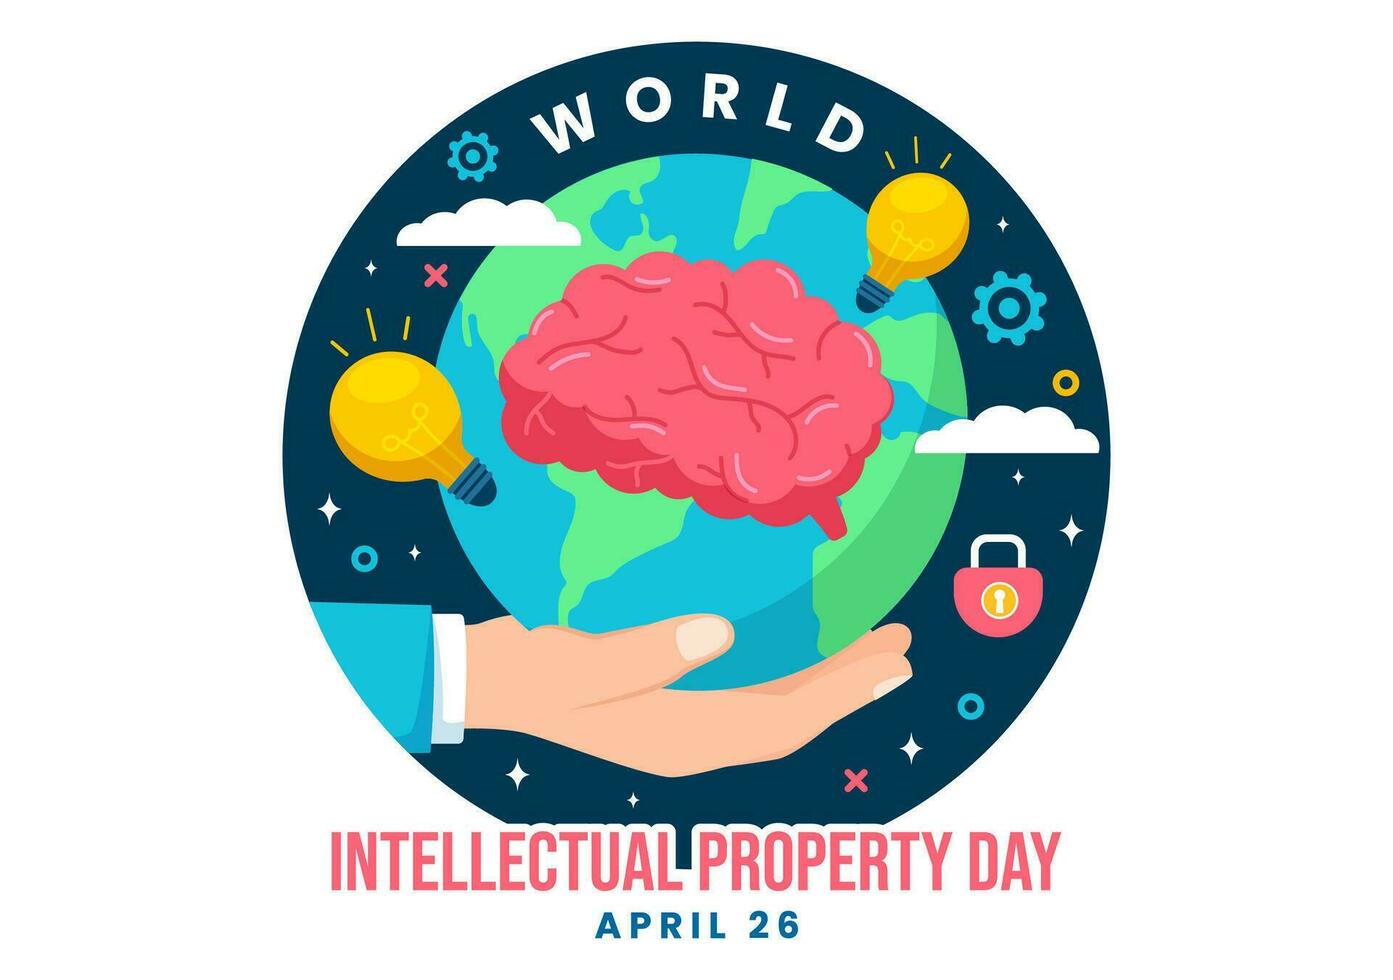 World Intellectual Property Day Vector Illustration on 26 April with Brain and Light Bulb for Innovation and Ideas Creativity Concept Background